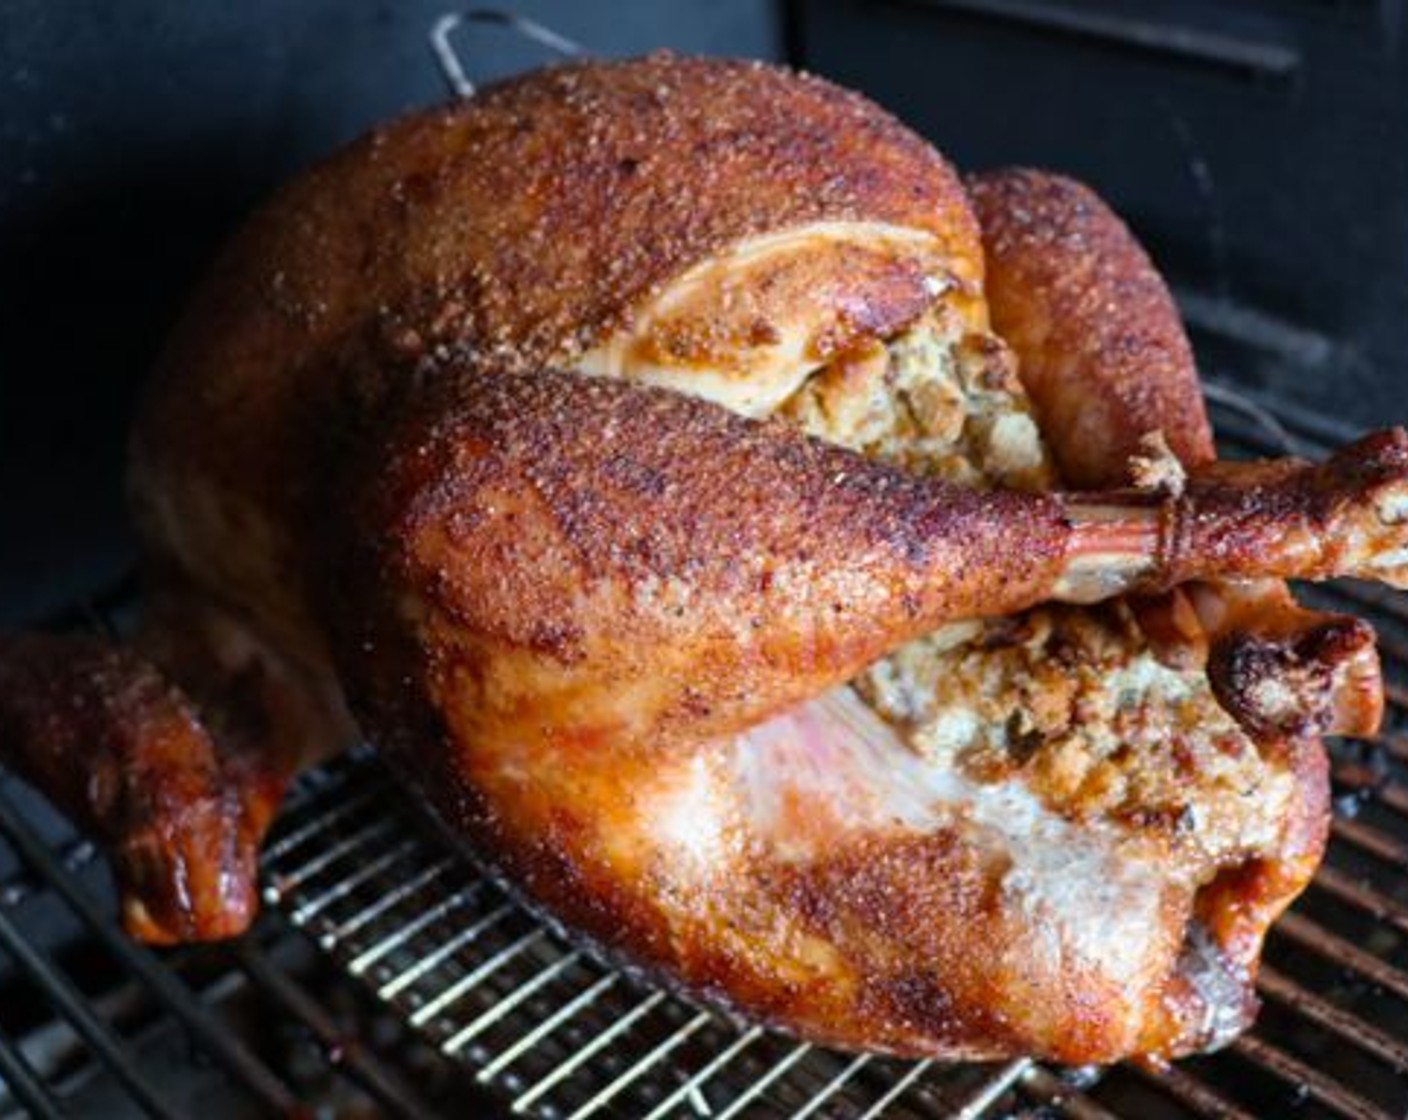 step 7 Place the turkey on the smoker and cook until an internal temperature of 165 degrees F (73 degrees C) in the breast. Be sure to check the internal temperature of the stuffing as well. It also needs to reach 165 degrees F before serving.